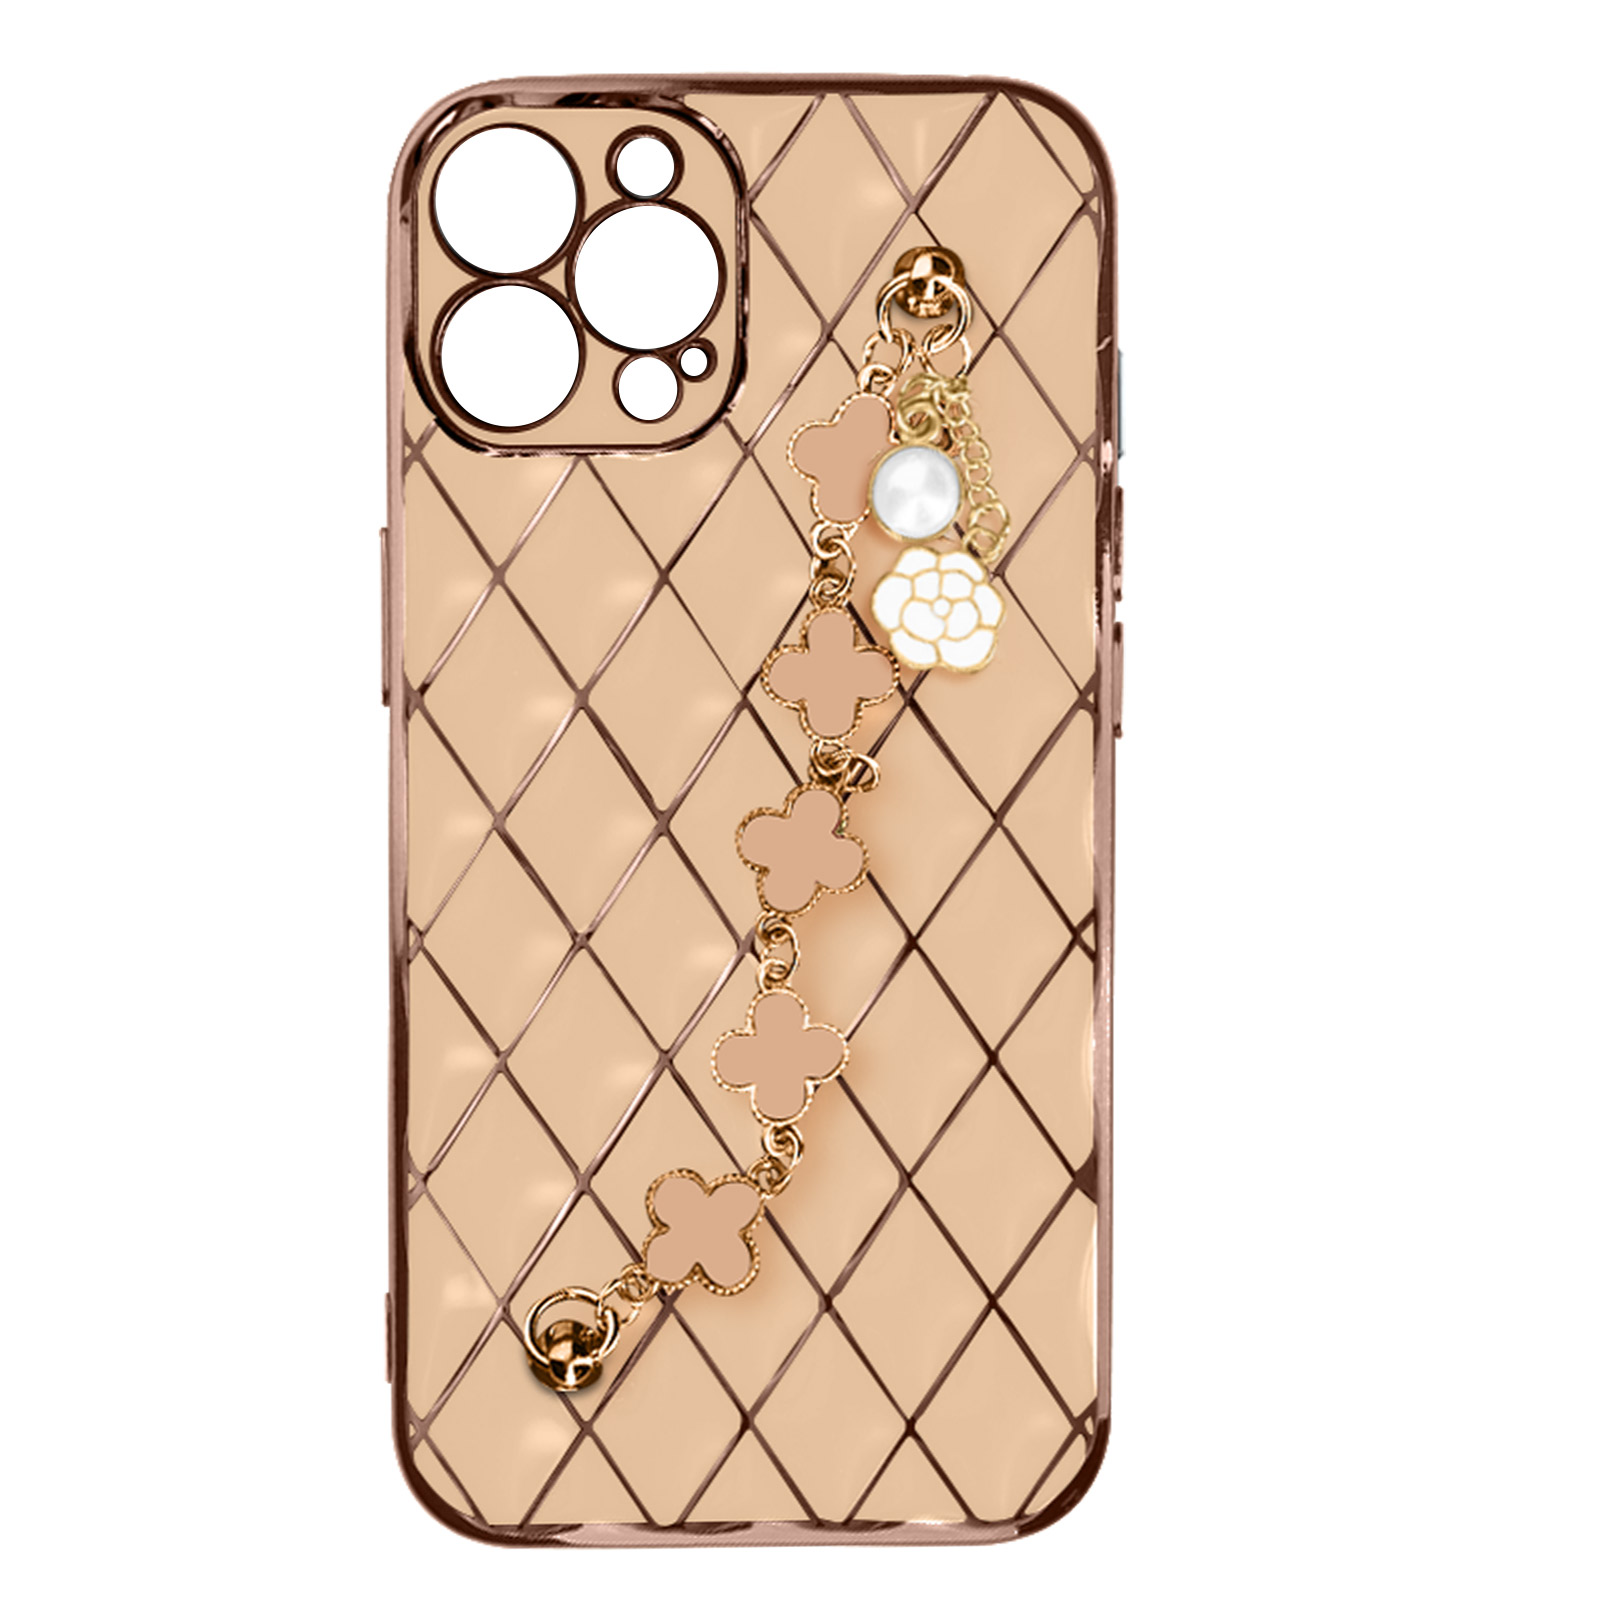 AVIZAR Trend 13 Backcover, Apple, iPhone Series, Pro, Rosegold